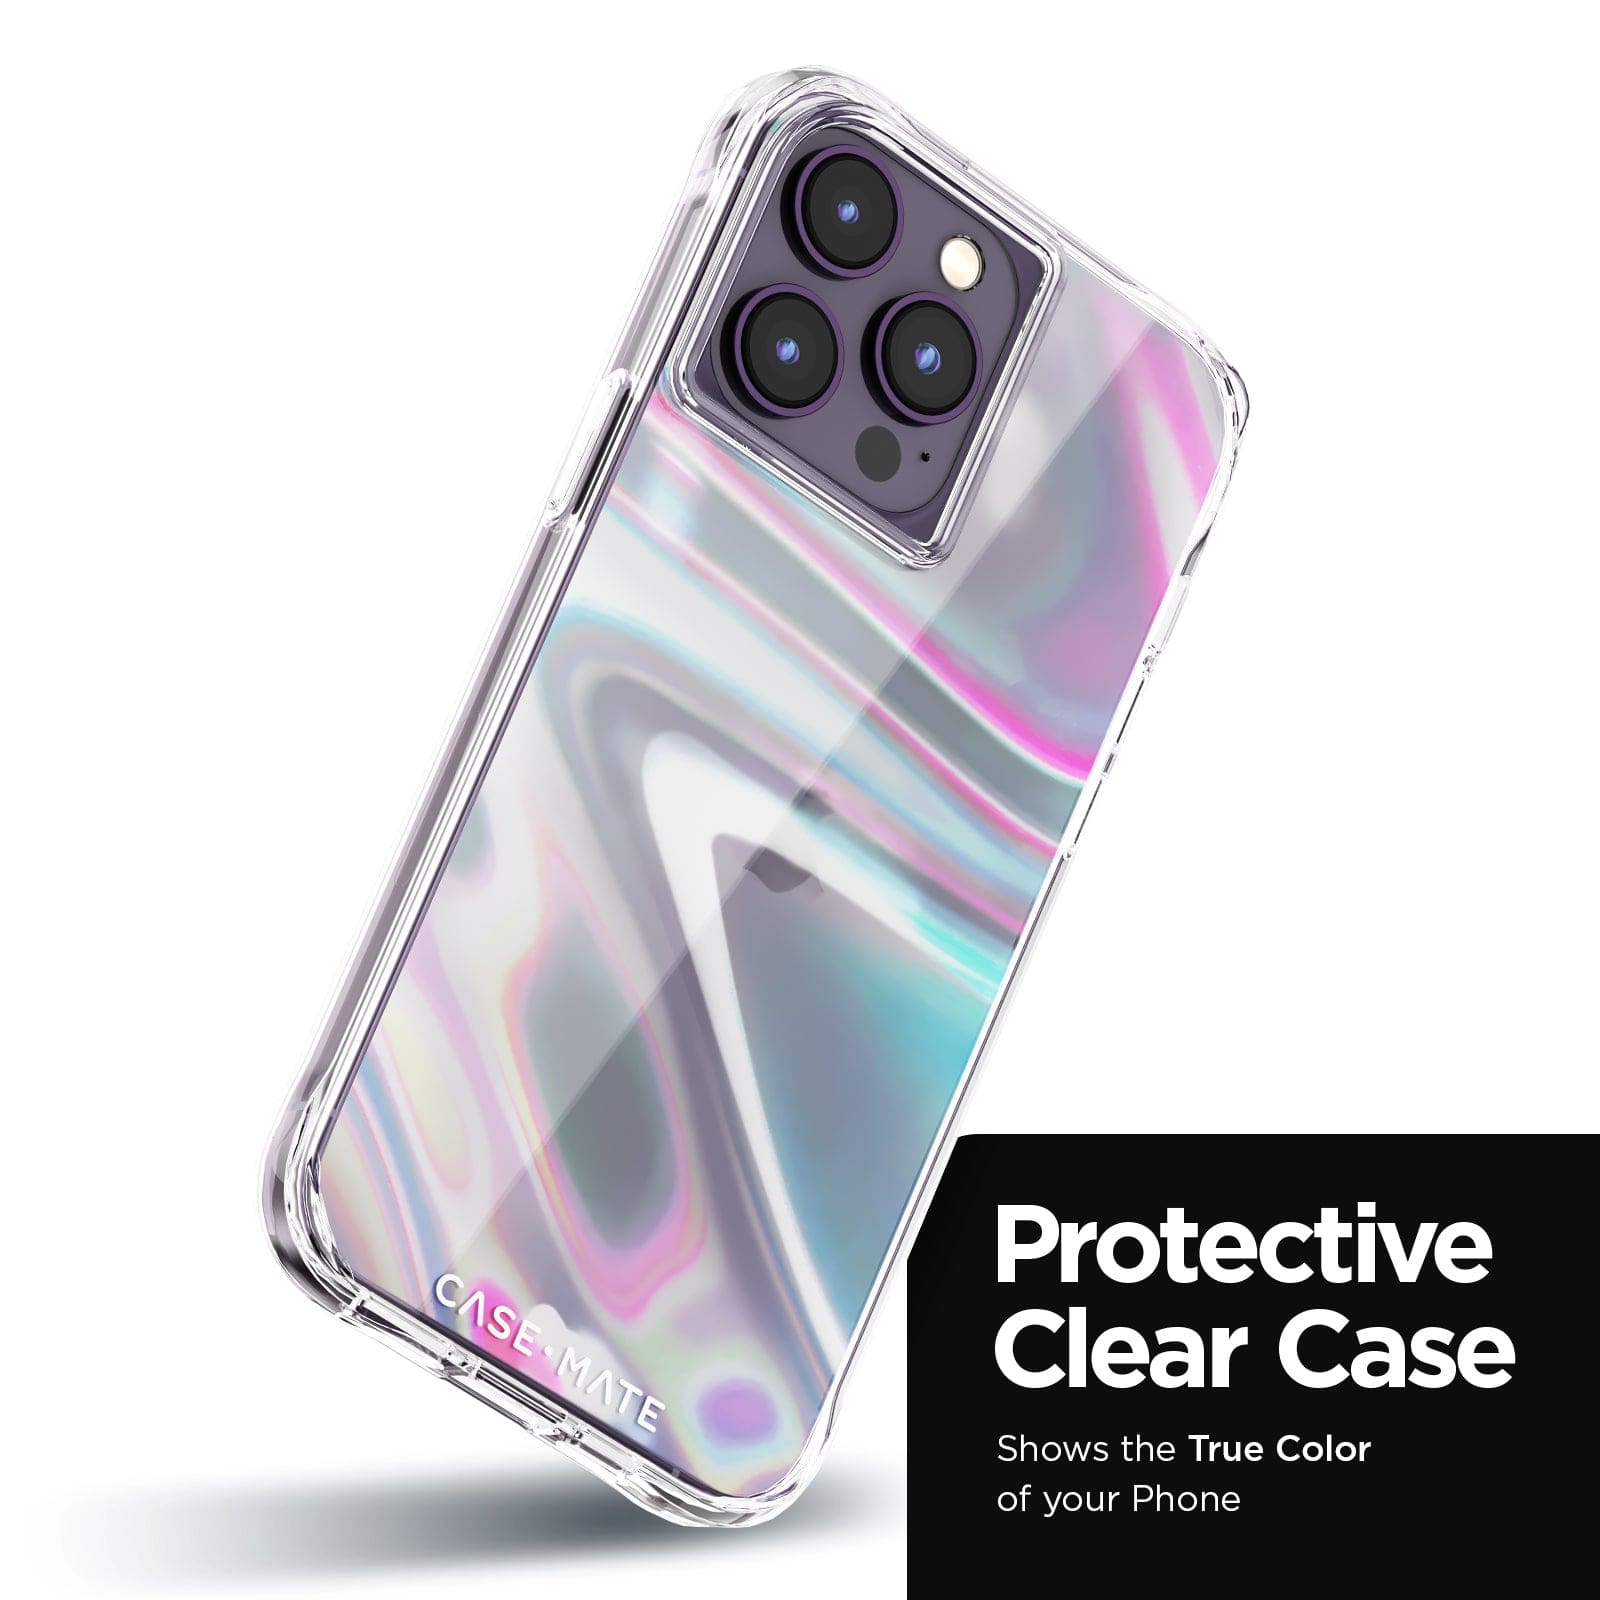 PROTECTIVE CLEAR CASE SHOWS THE TRUE COLOR OF YOUR PHONE. 